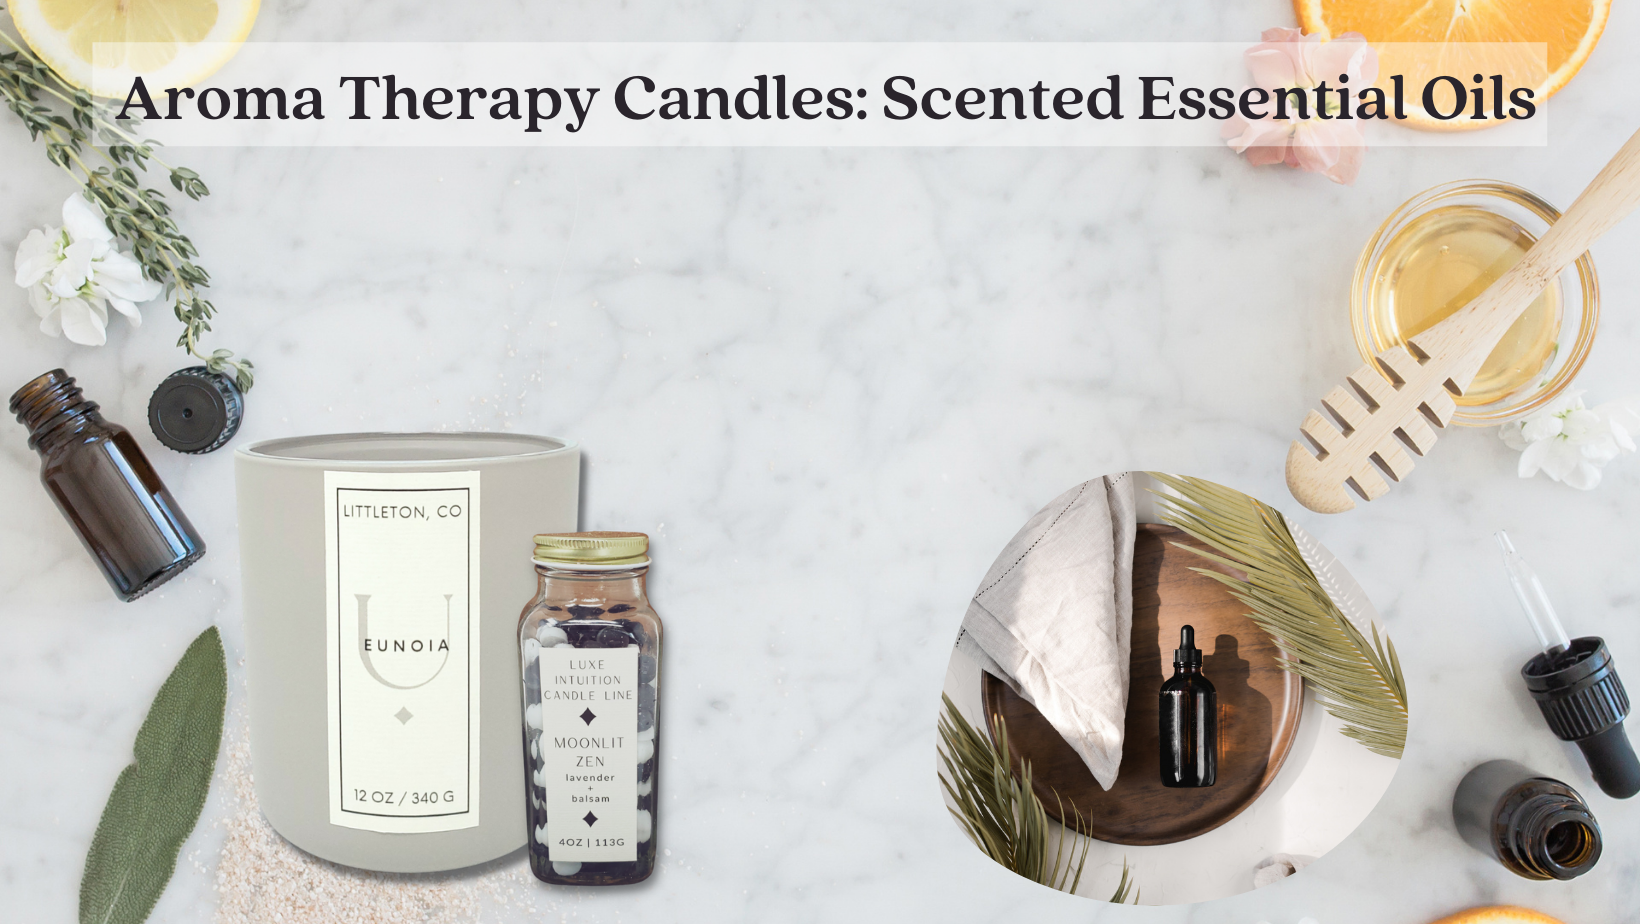 Aromatherapy Candles: Essential Oils